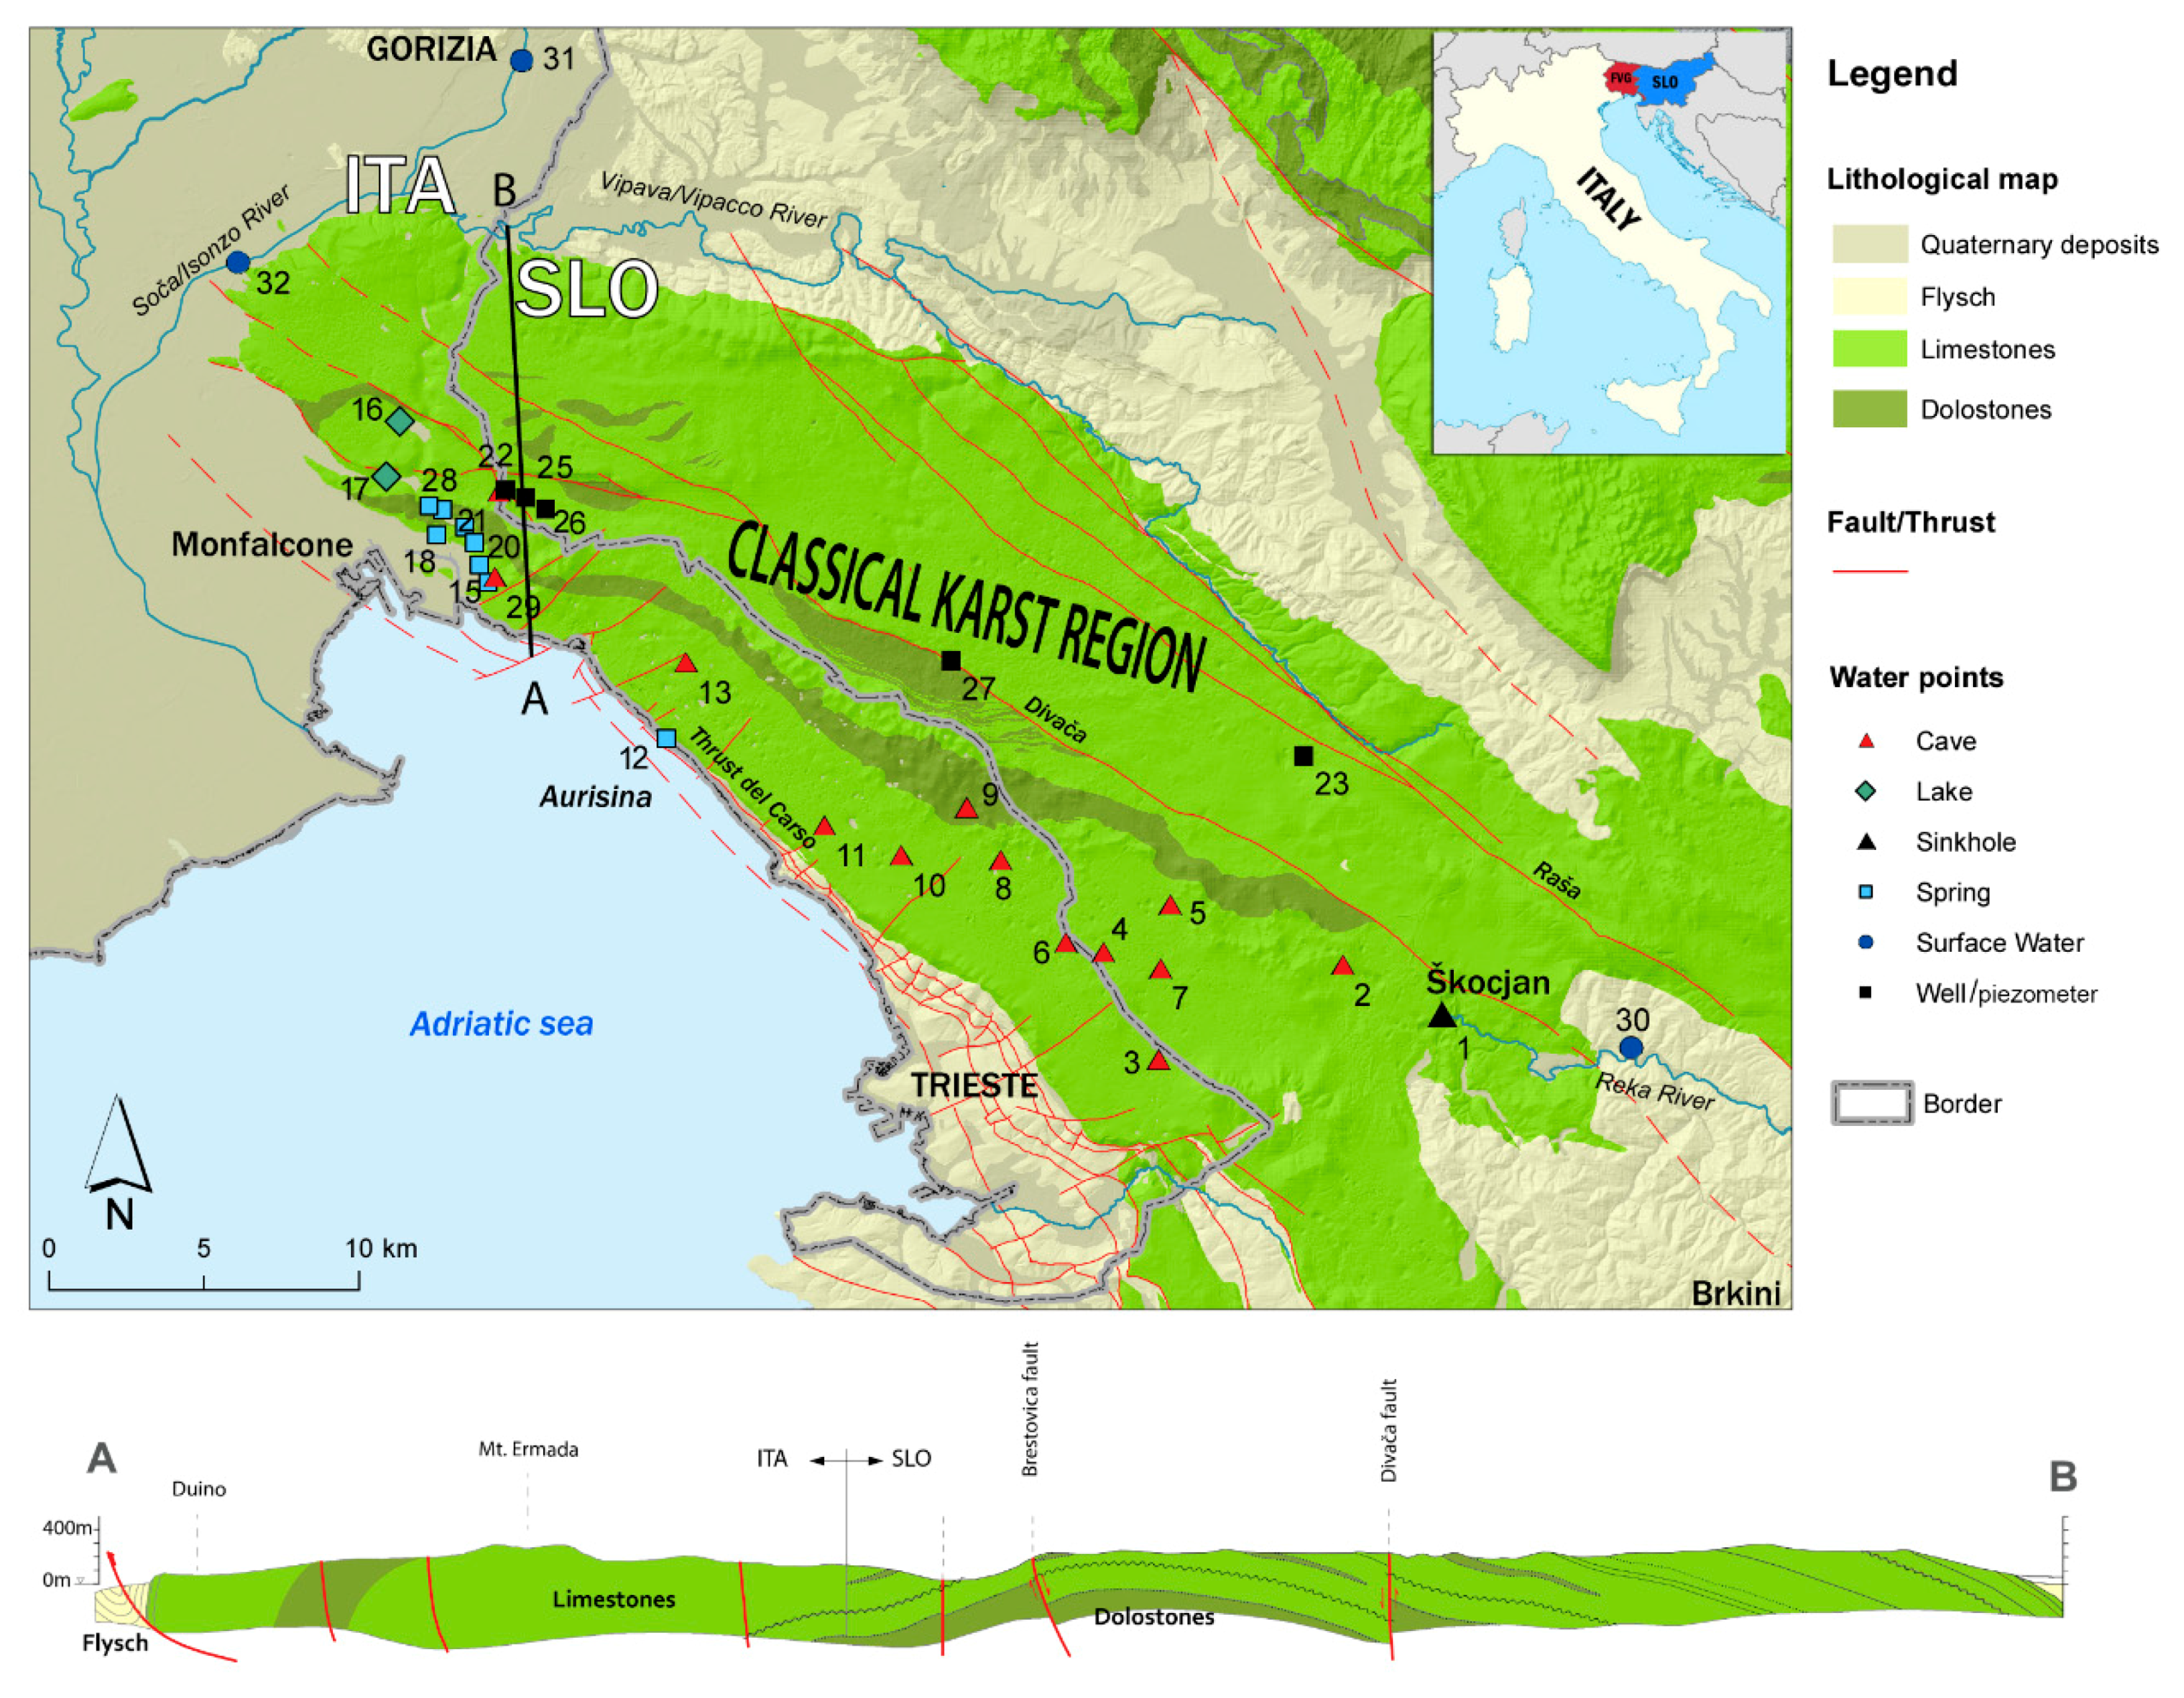 Geosciences | and Classical by Karst Isotopic Means (87Sr/86Sr) Groundwater Values: Characterization Aquifer (Italy–Slovenia) Non-Conservative and Case Conservative δ2H) The (δ18O Free of Full-Text | Region